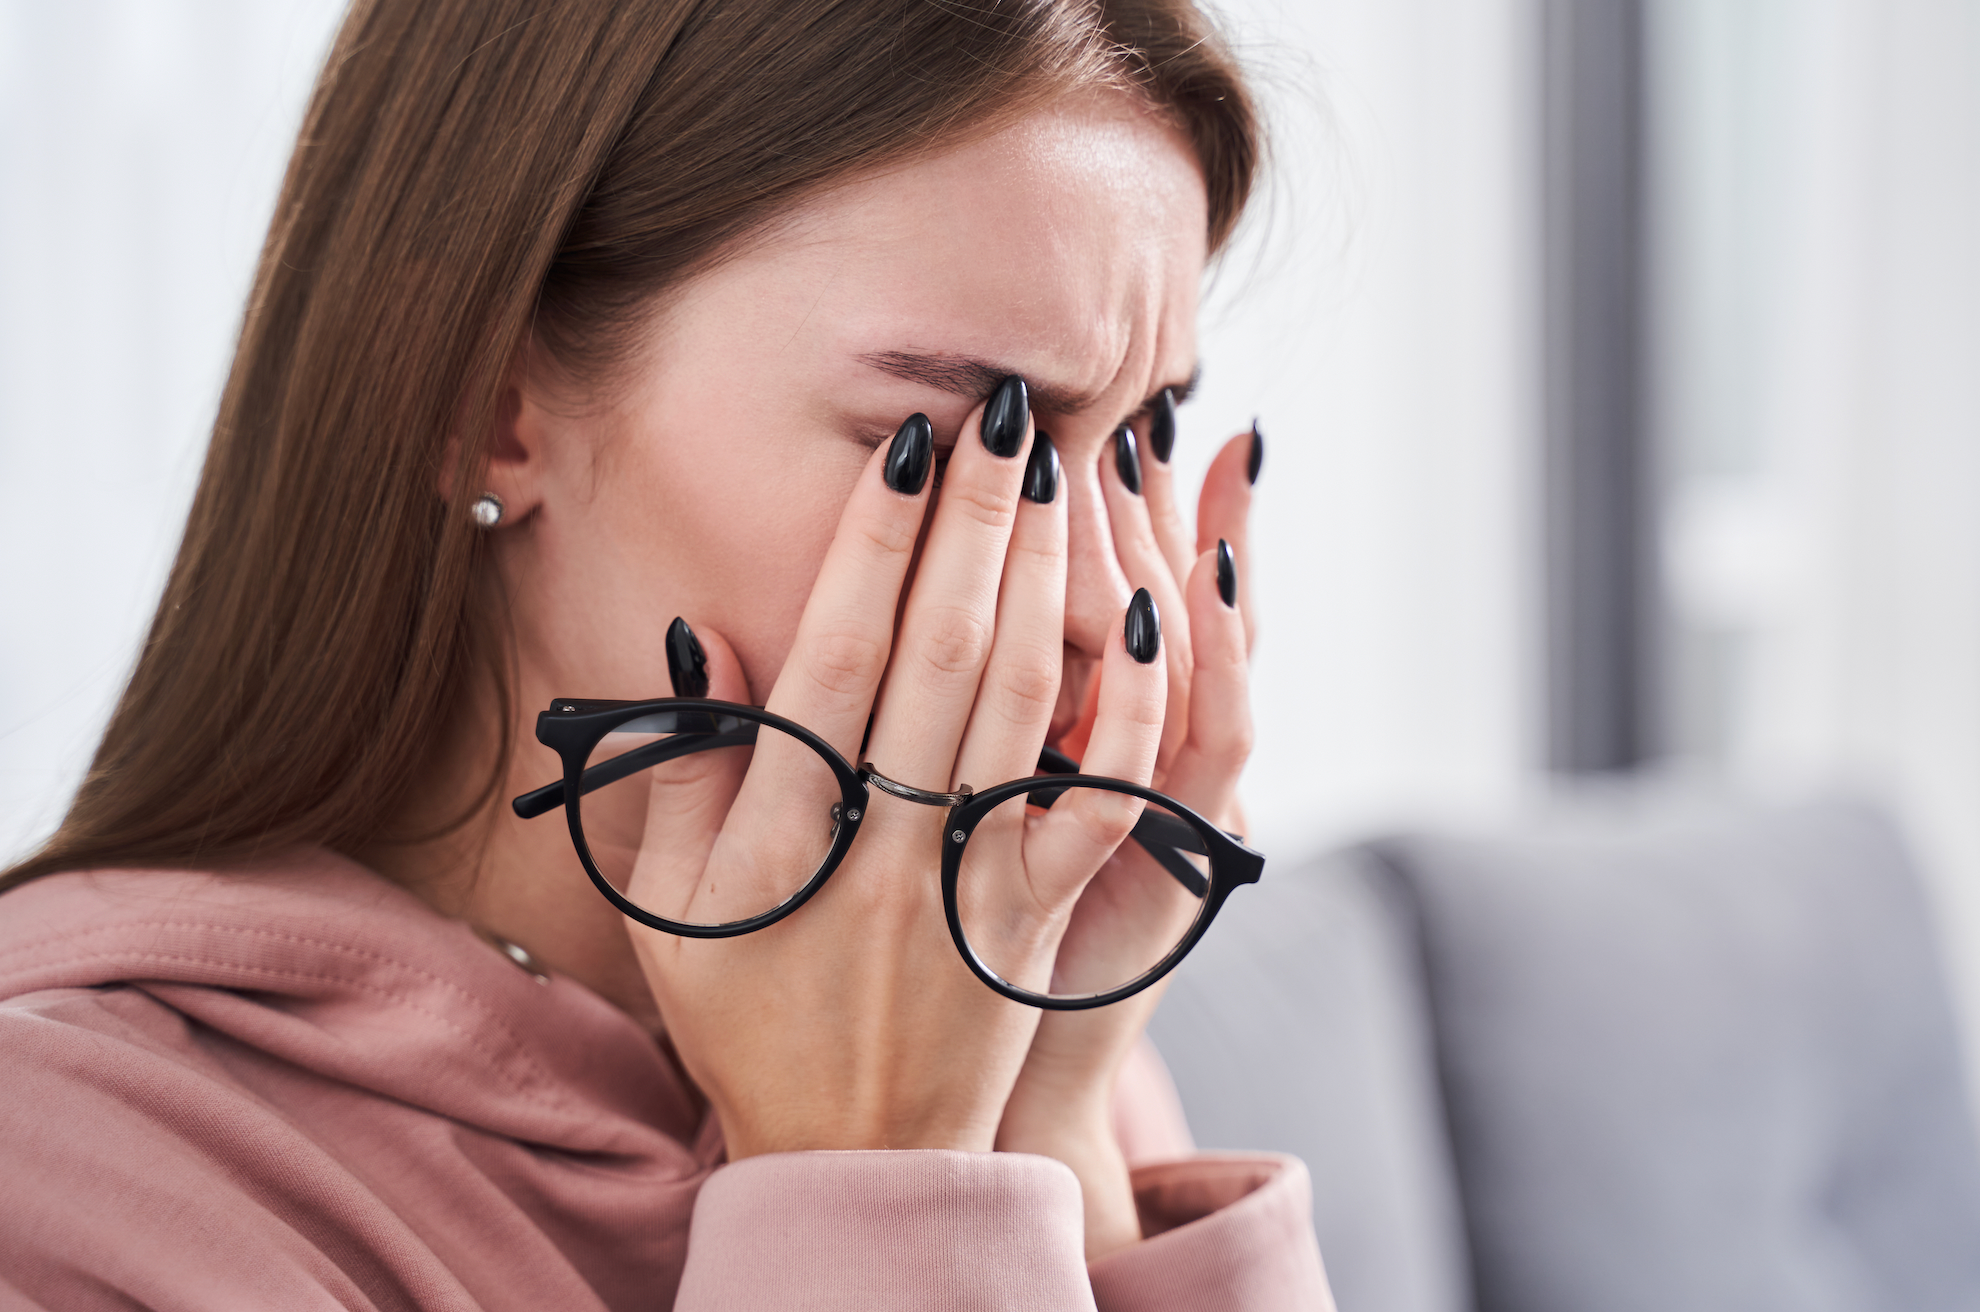 Regarding ocular surface diseases such as dry eye syndrome, the prevalence of ocular rubbing has been estimated to range from 20% to 30% in studies. (Image credit ©Yakobchuk Olena / stock.adobe.com)